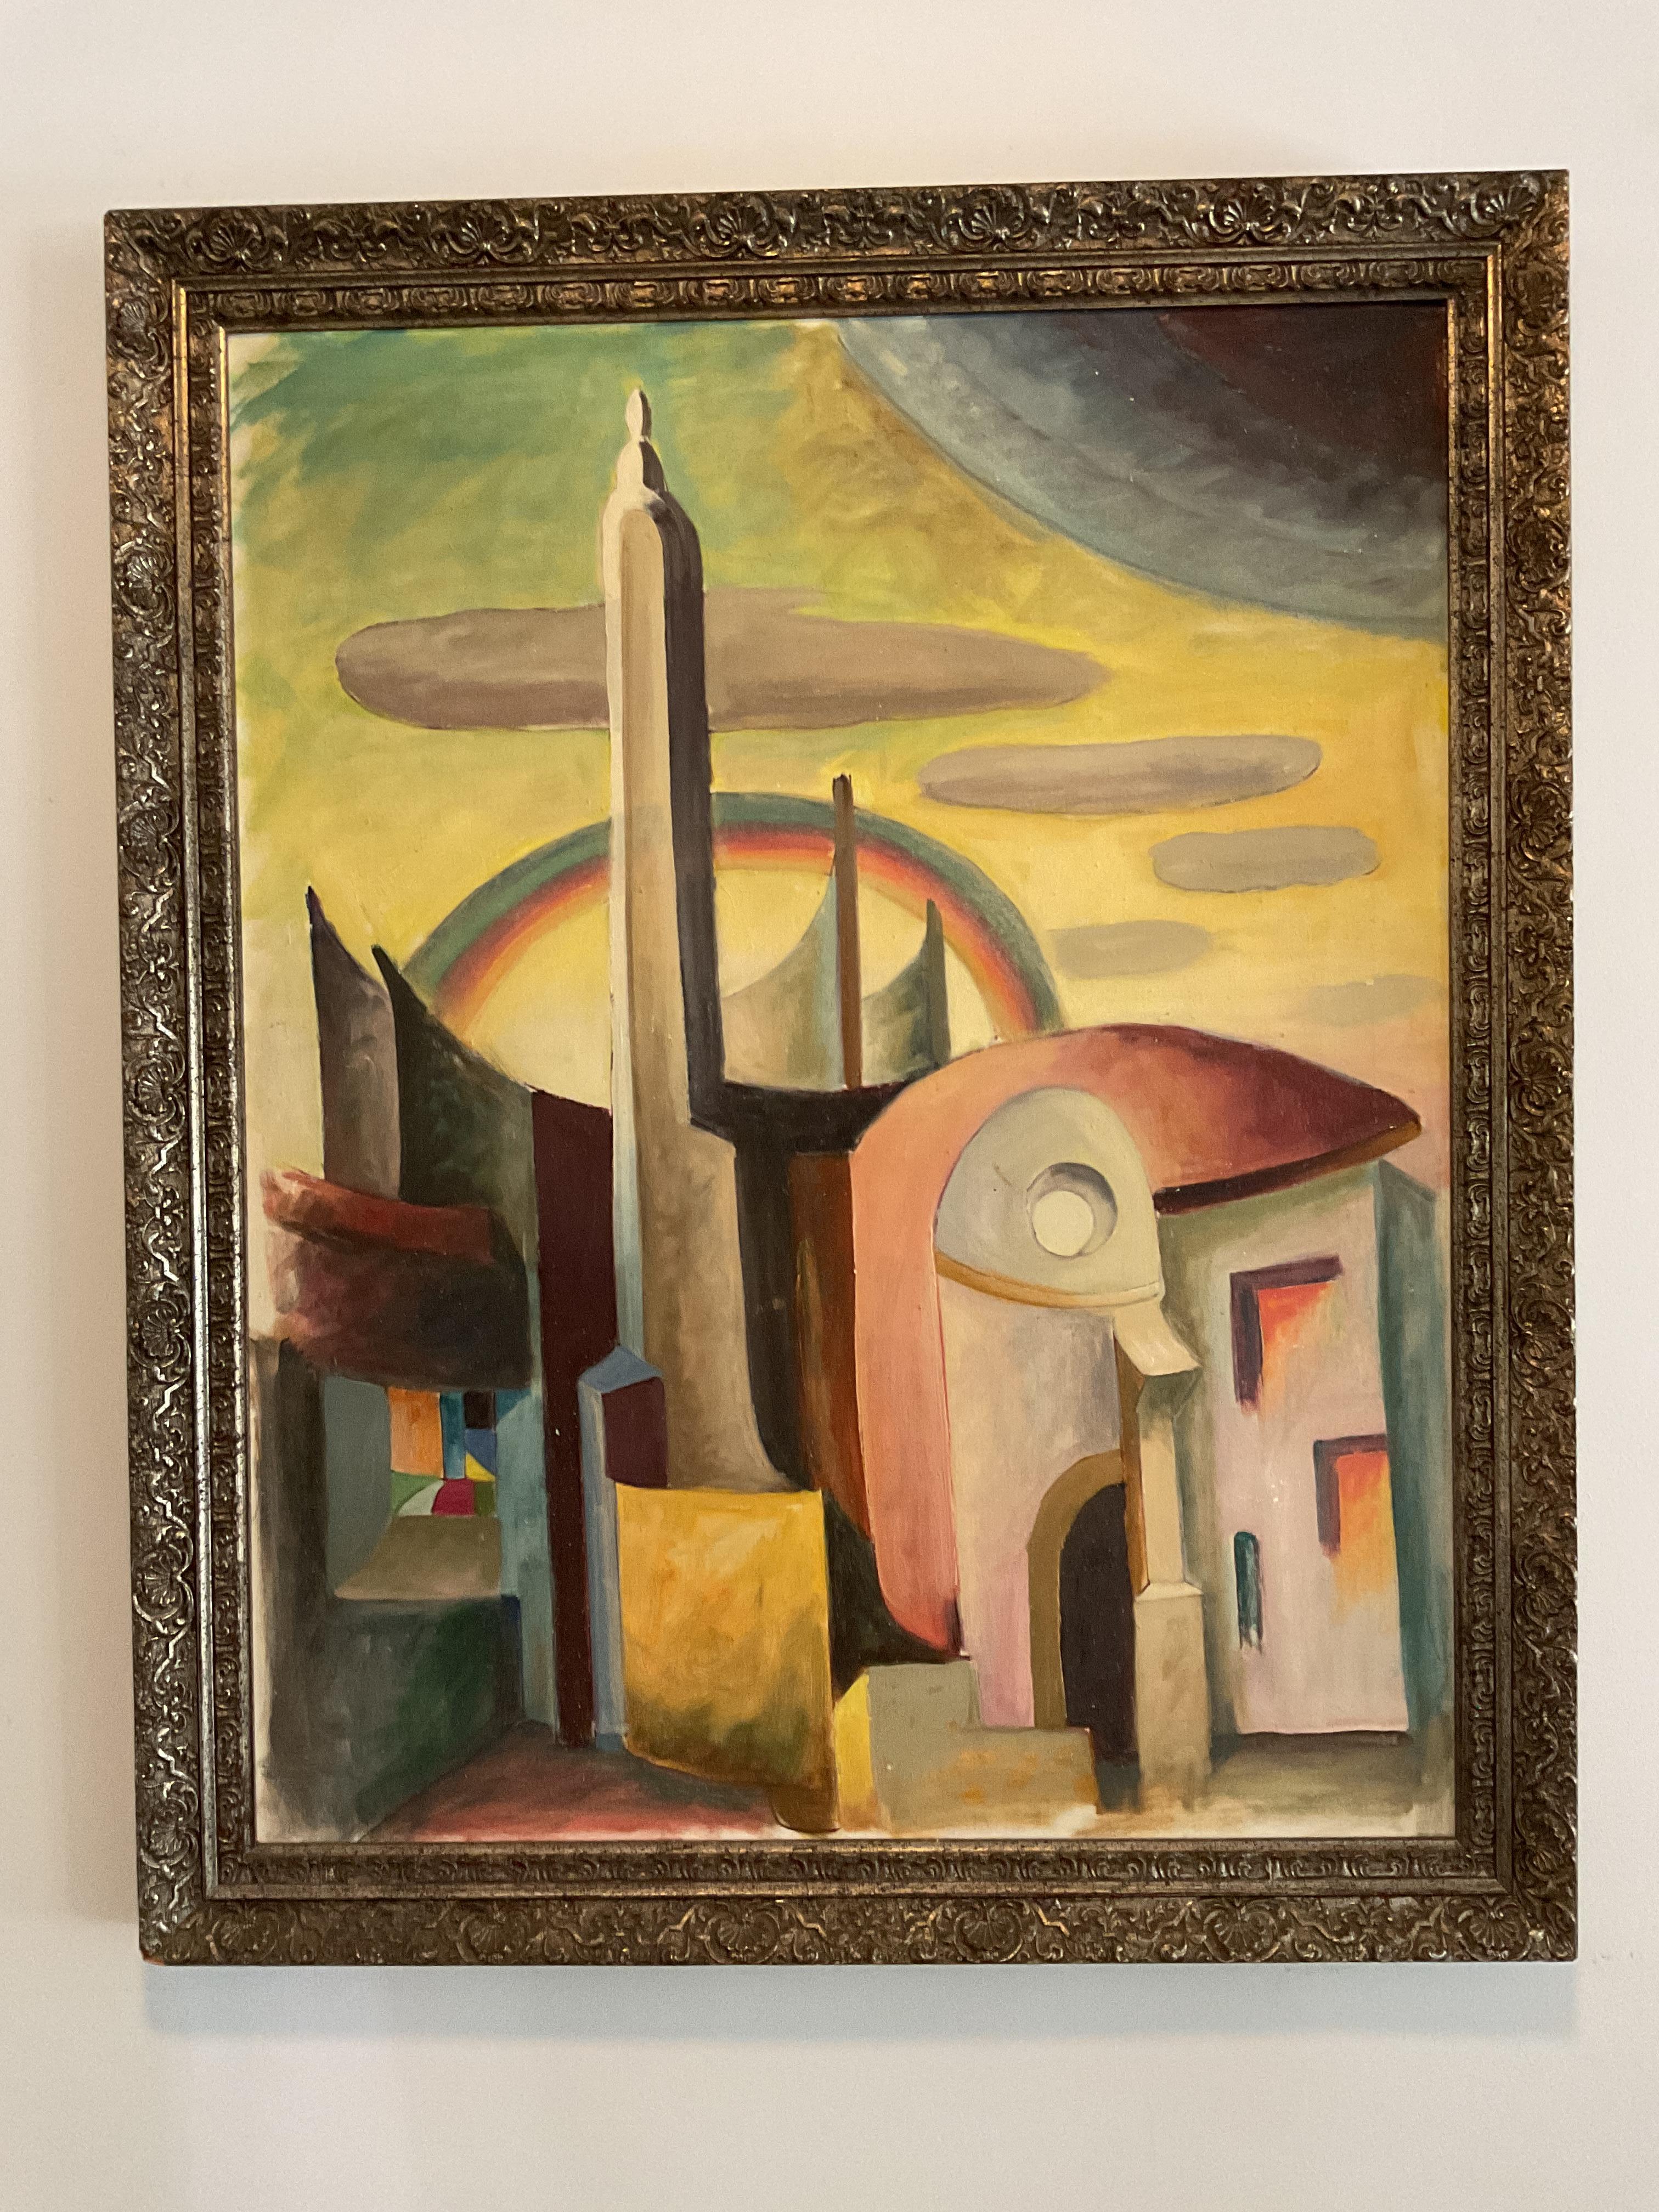 Like it’s listed companion piece, this is a late Art Deco/Moderne architectural painting with vibrant colors and bold composition. This work is untitled but features a whimsical and futurist metropolis.  The oil on canvas measures 24” wide by 30”